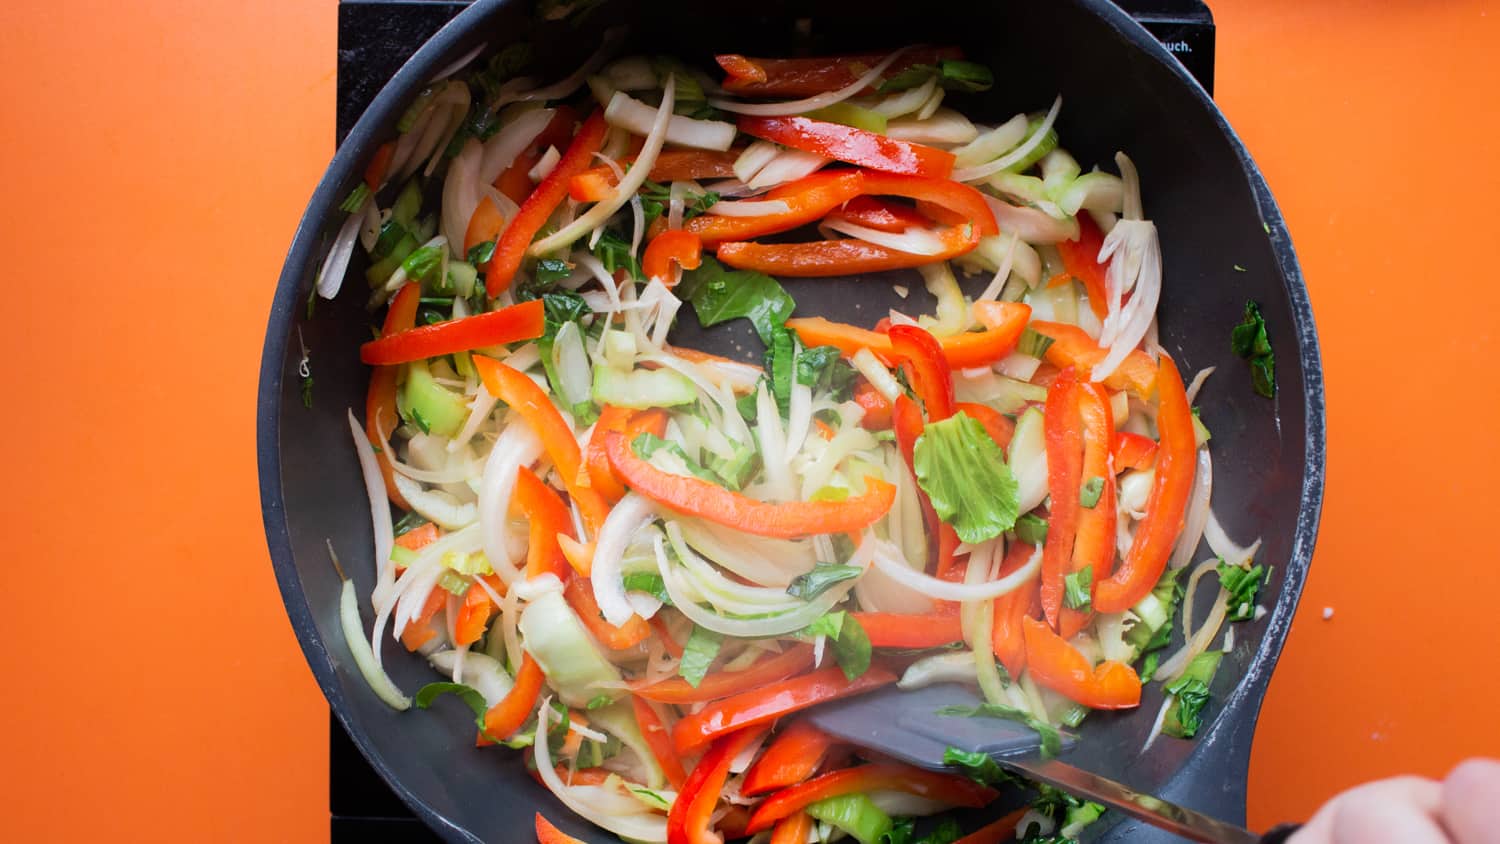 Sliced peppers, onions and pak choi in a frying pan mixed with a spatula on a cooker on an orange background.